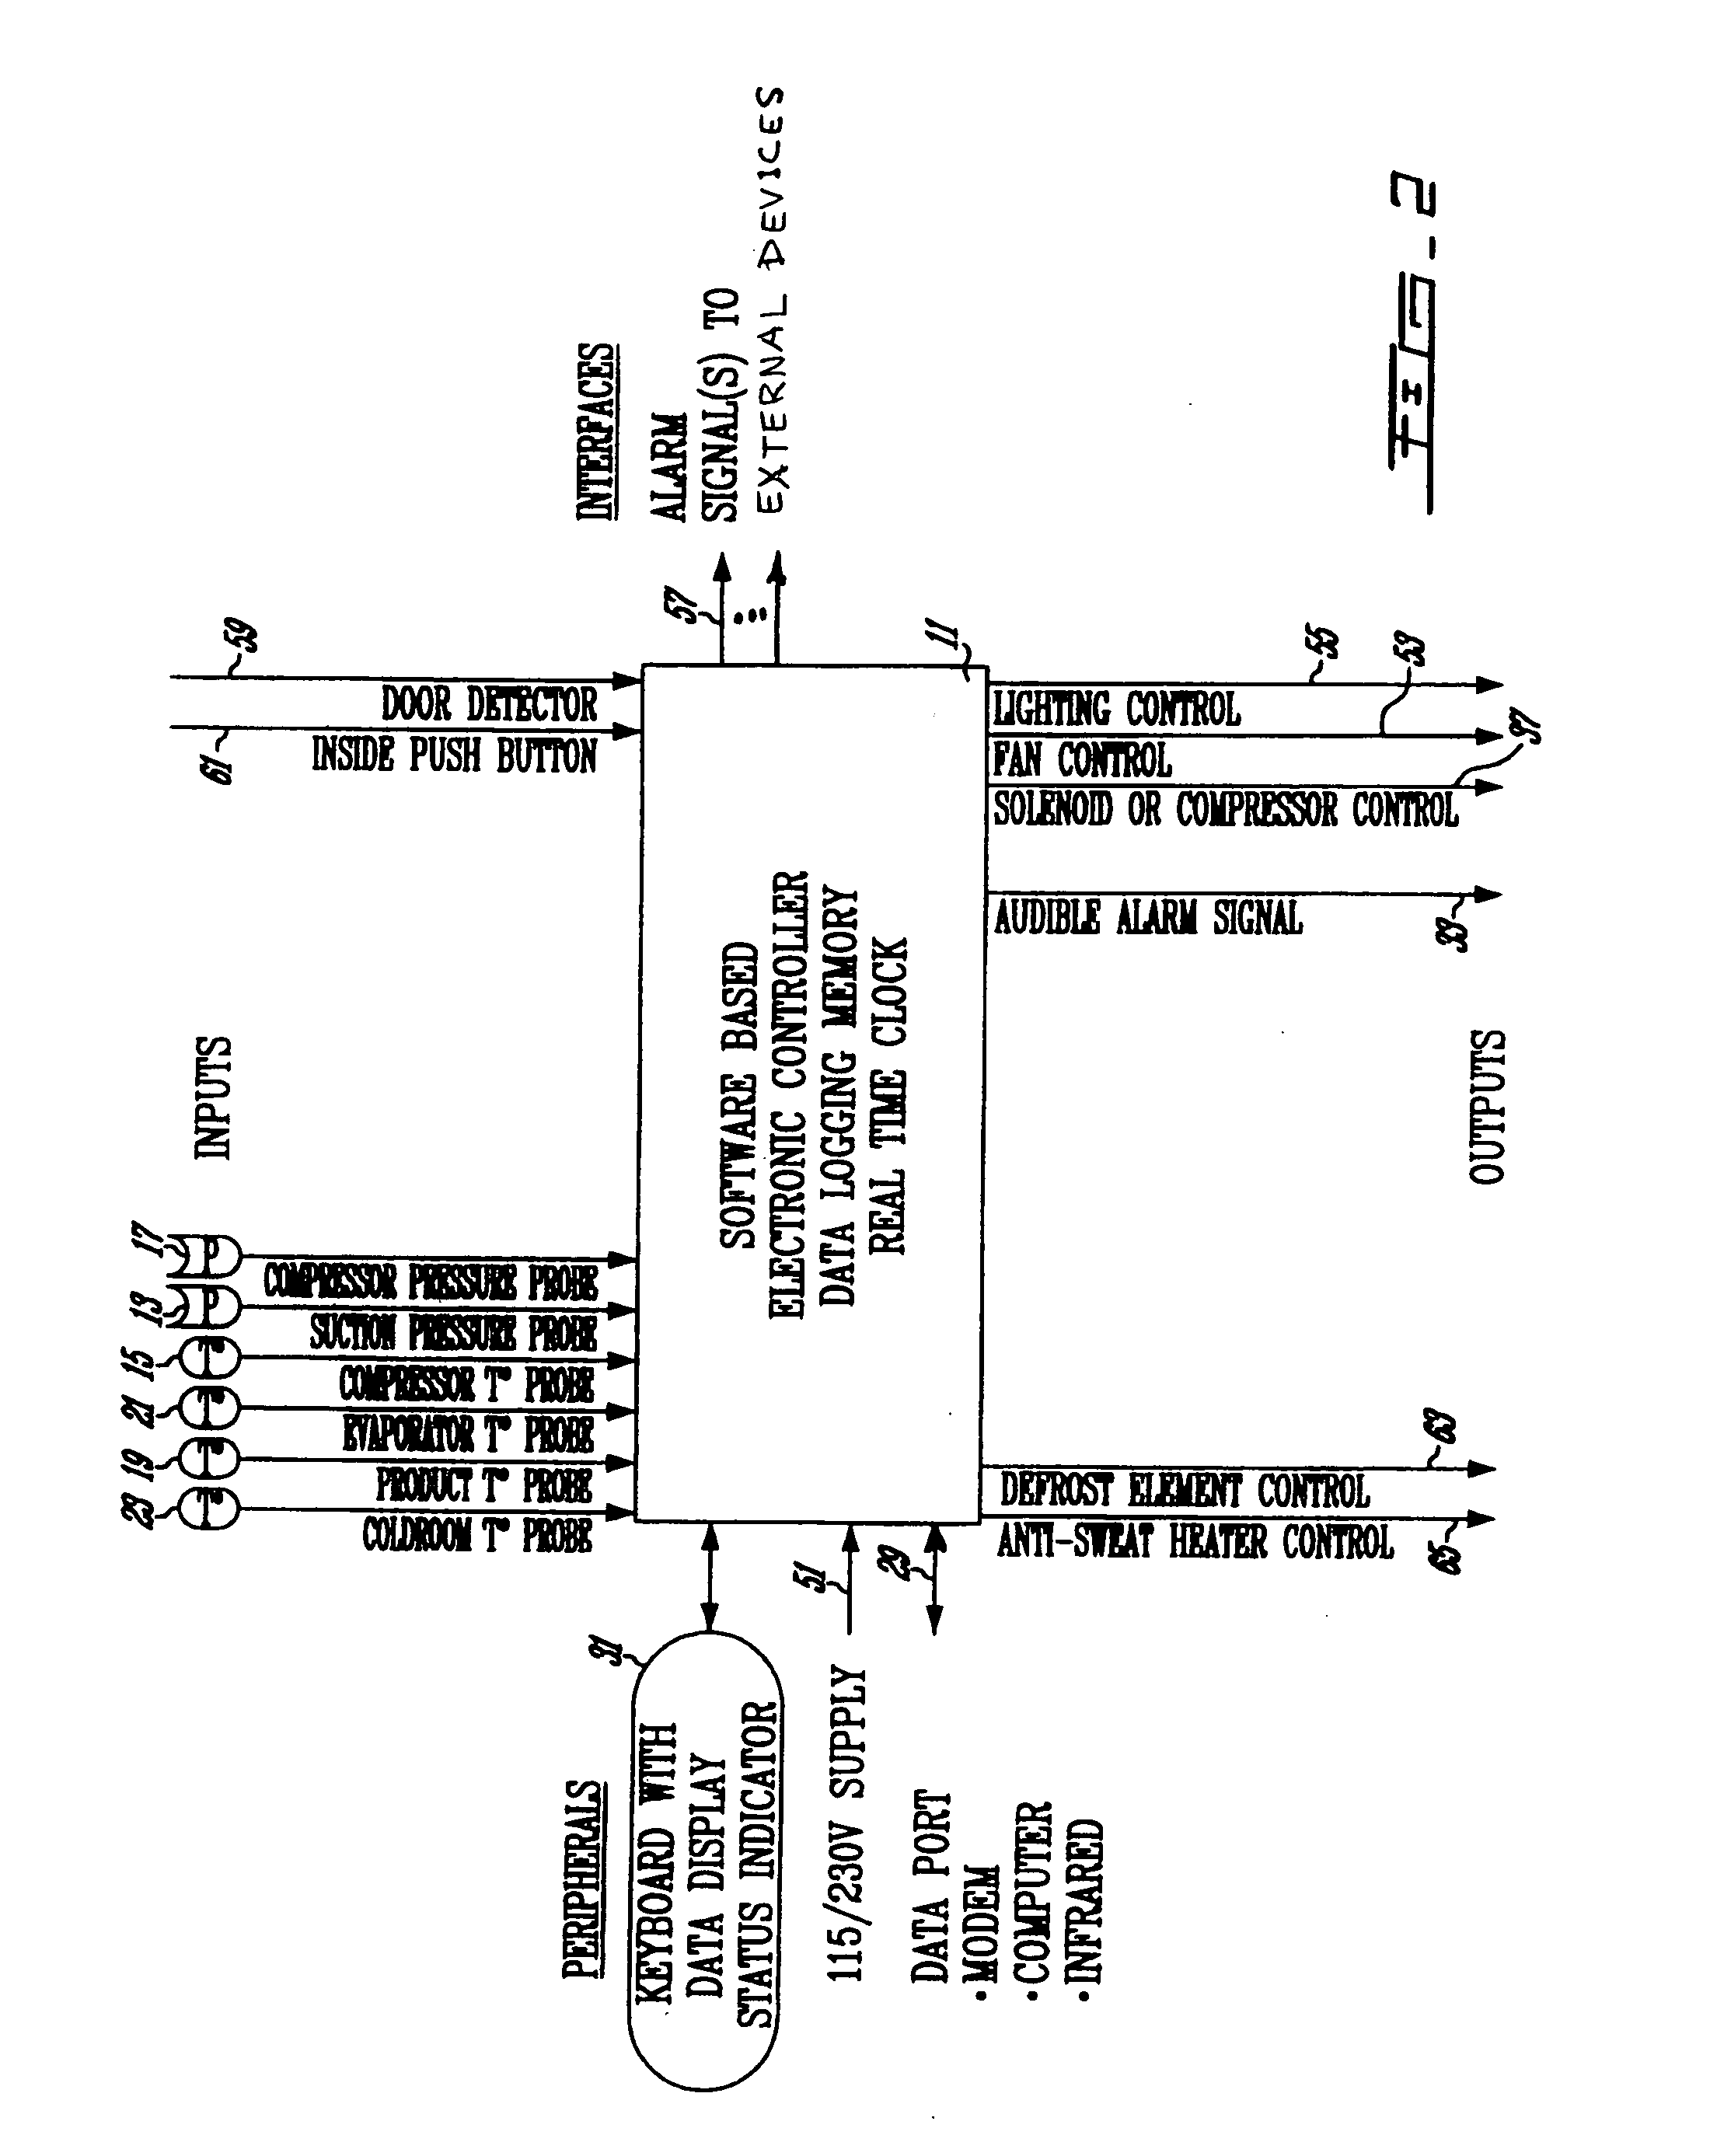 Walk-in refrigeration unit control and monitoring system